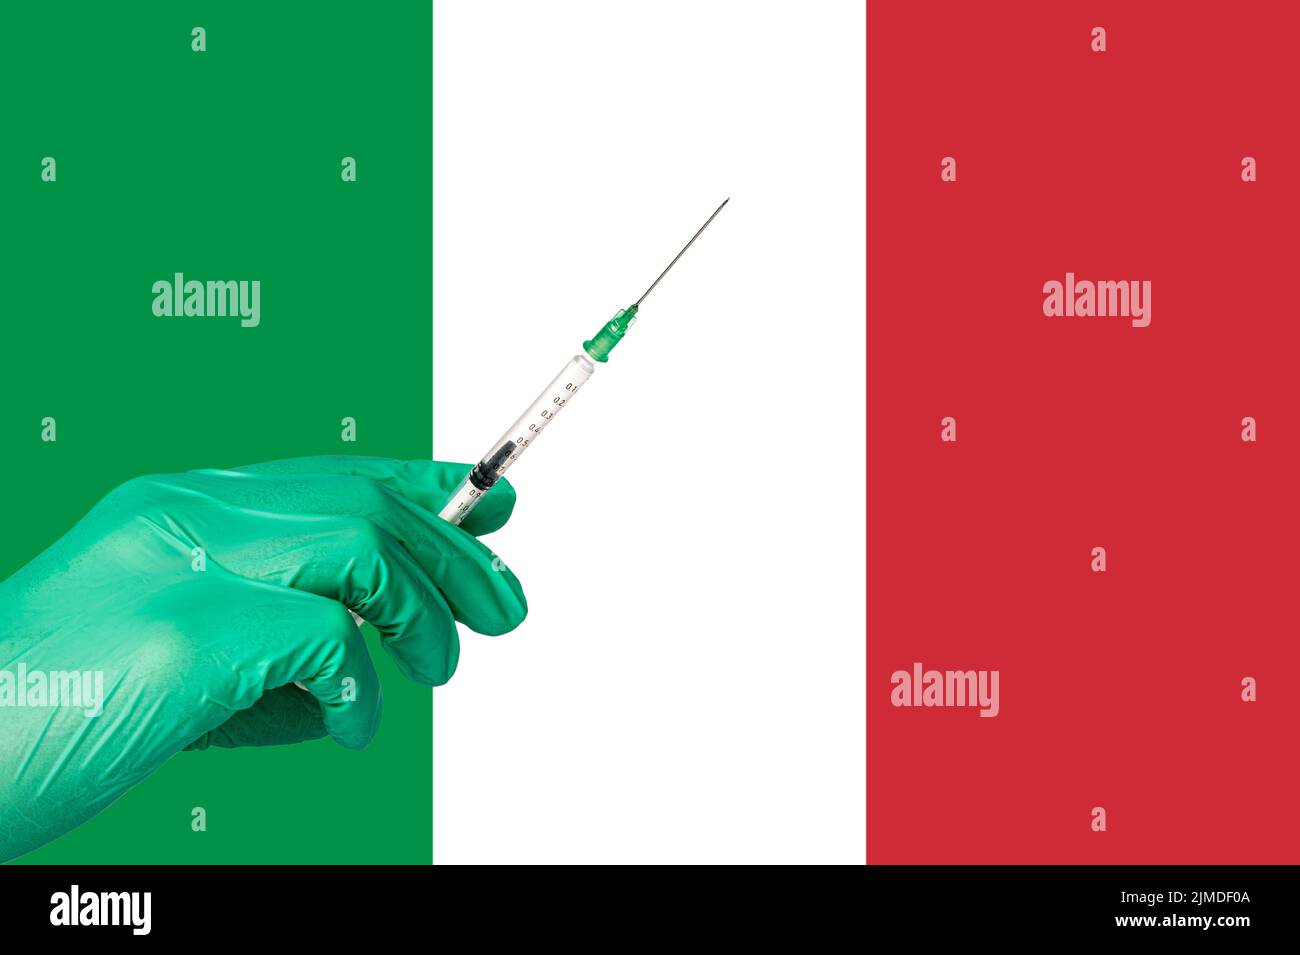 Corona vaccination in front of a Italy flag Stock Photo